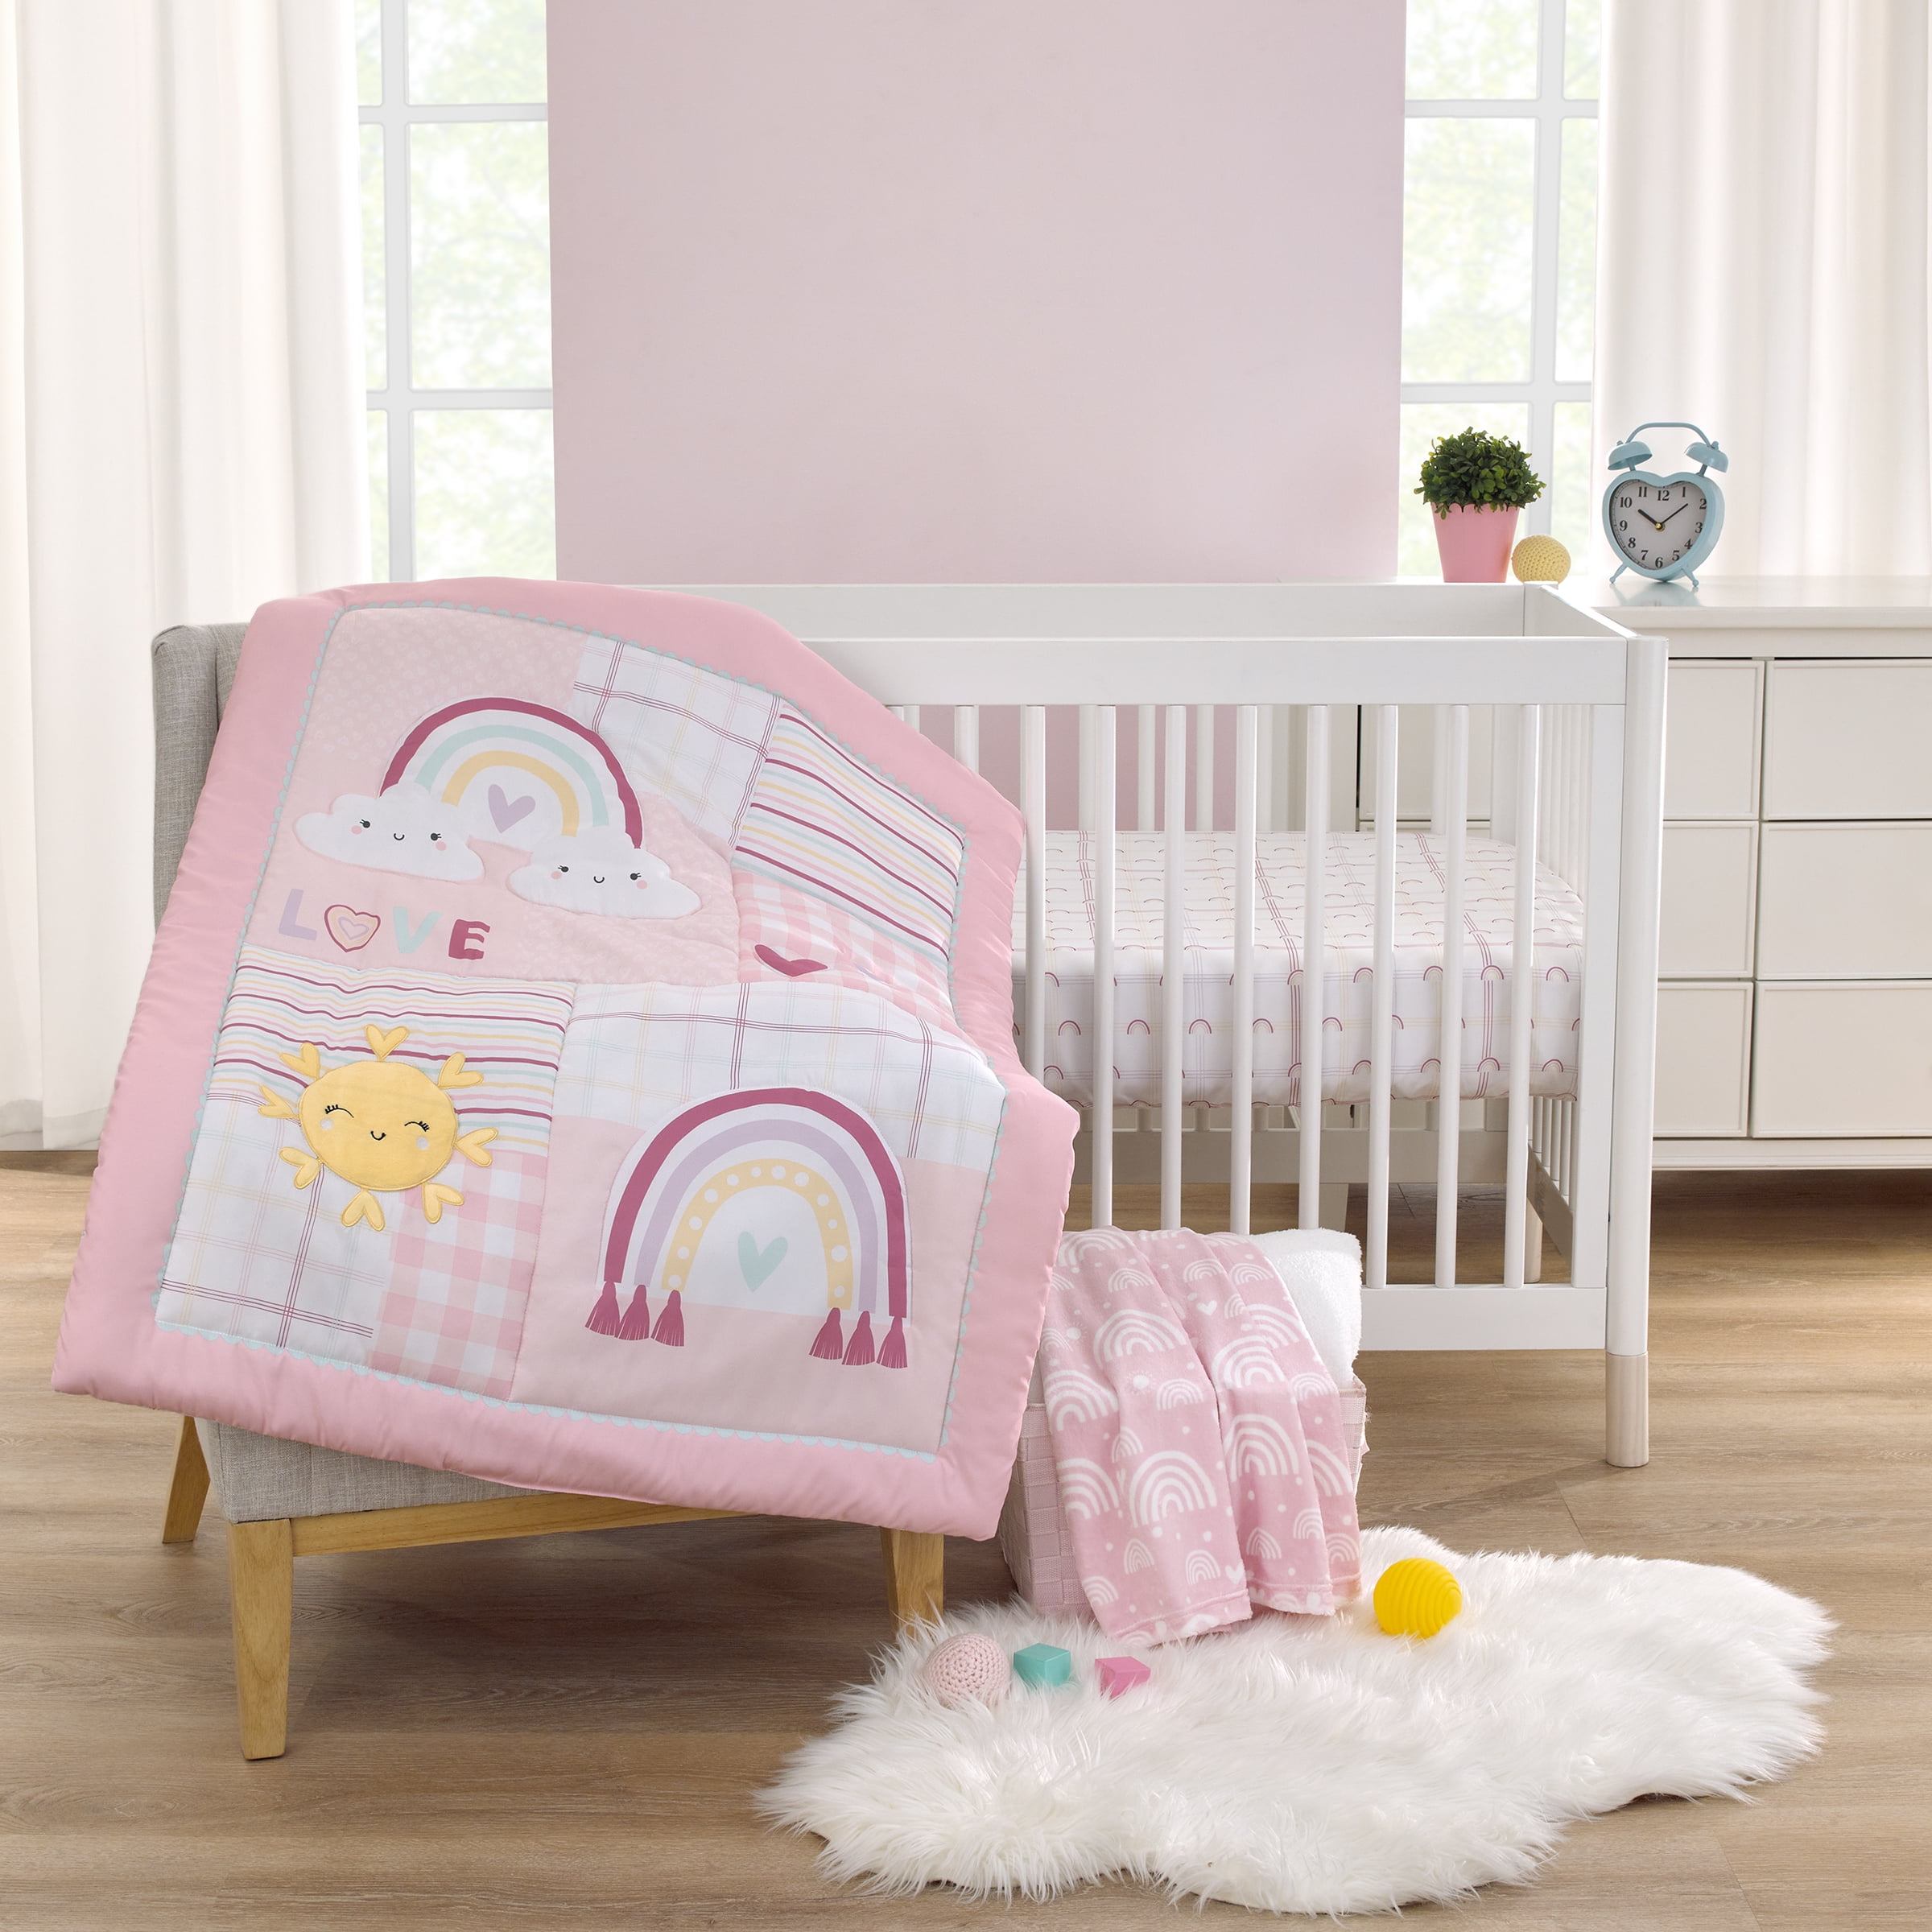 Wall Border For Rose Damask Baby Bedding Set by Sisi 